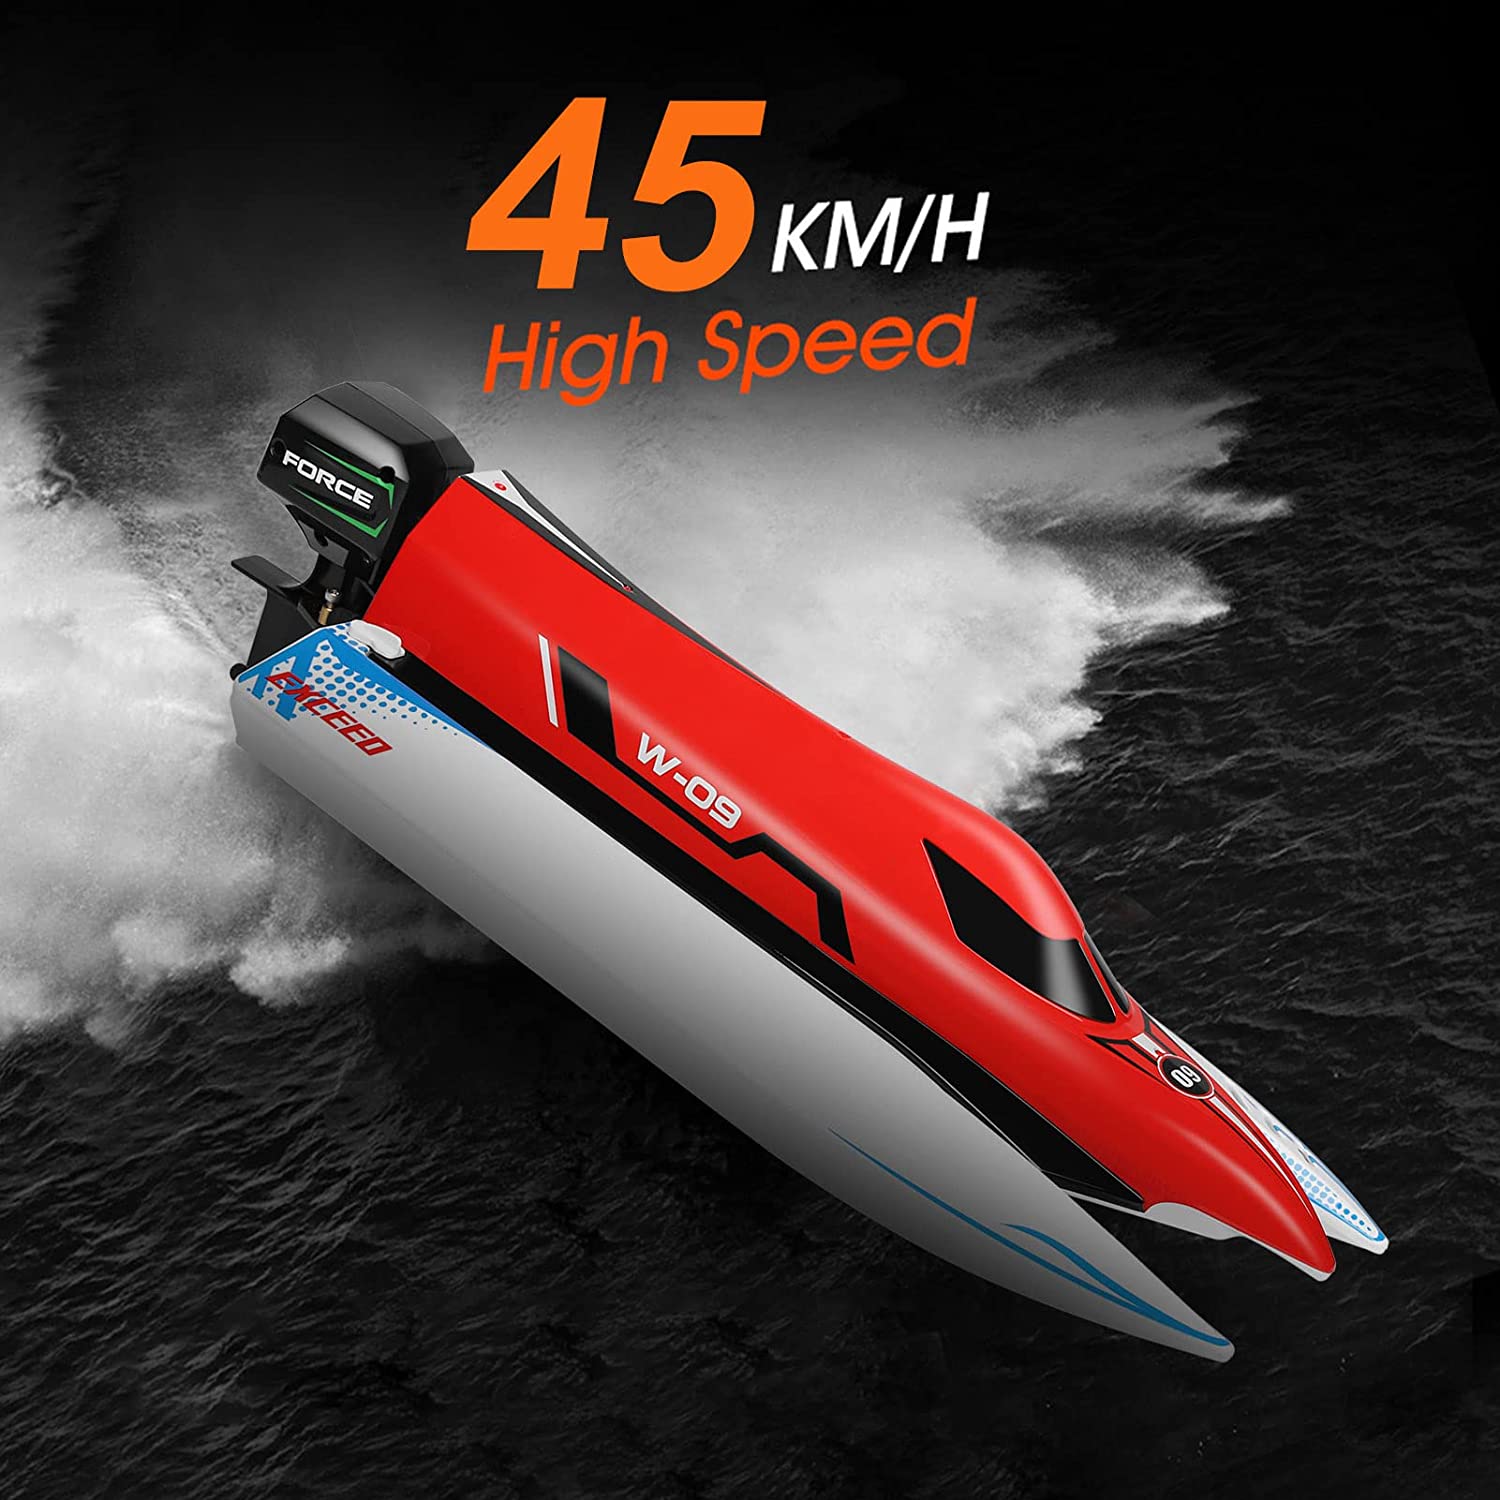 WLtoys WL915-A Brushless RC Boat, 2,4GHz Remote Control Boat, 45KM/H High Speed ​​RC Racing Boat (δικαιώματα από μόνο του αν ανατραπεί) 